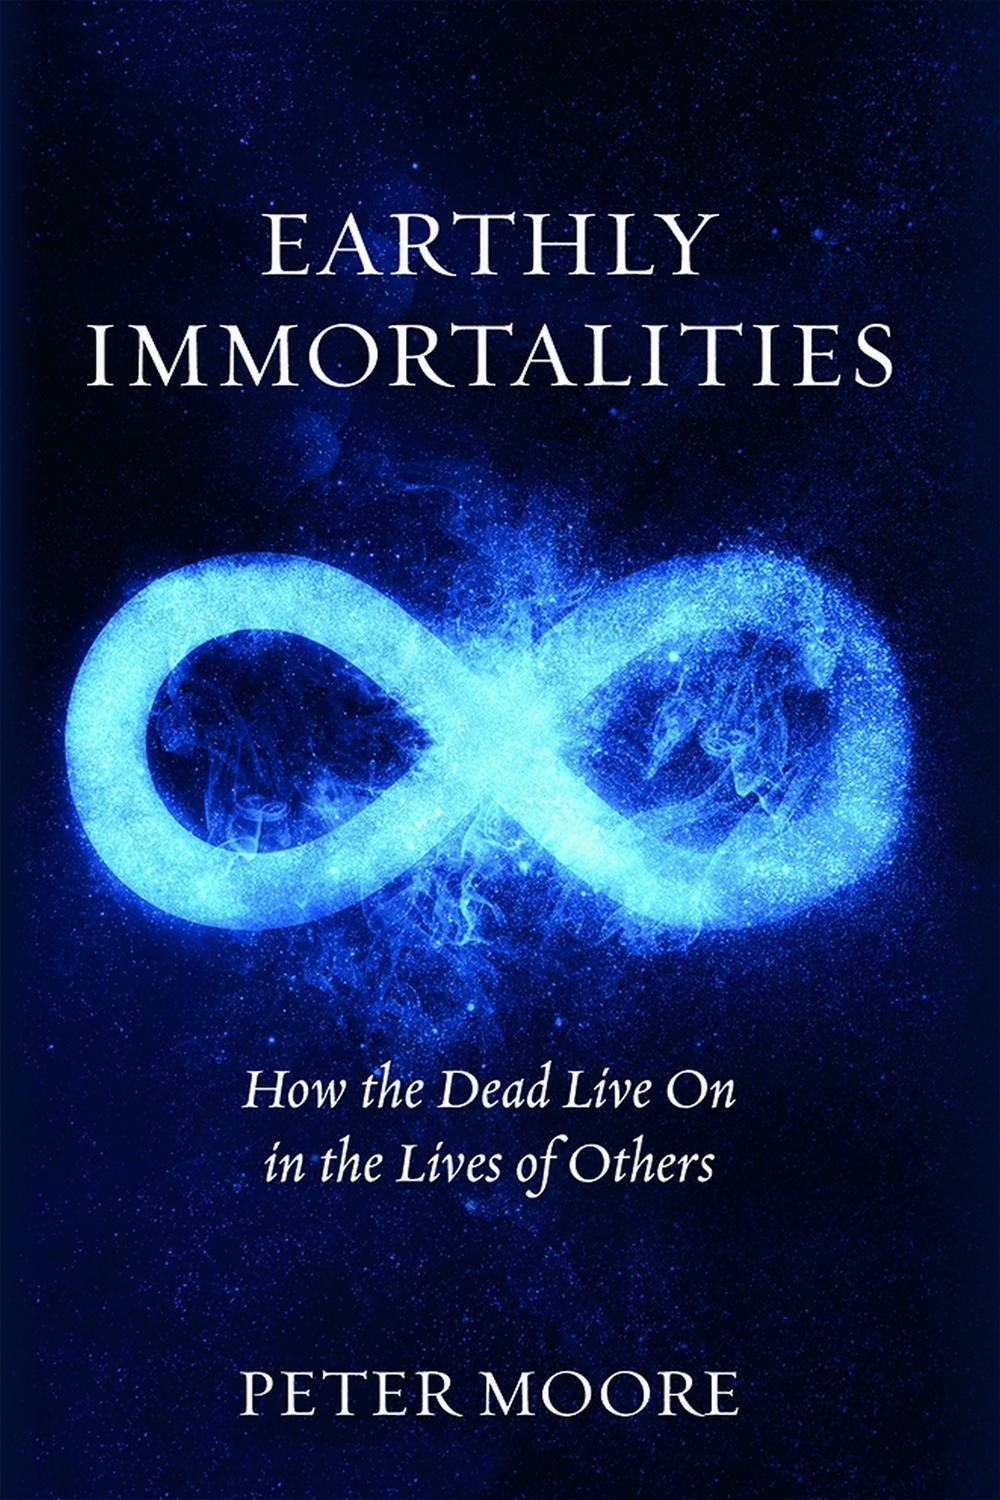 Earthly Immortalities: How the Dead Live On in the Lives of Others - Peter Moore